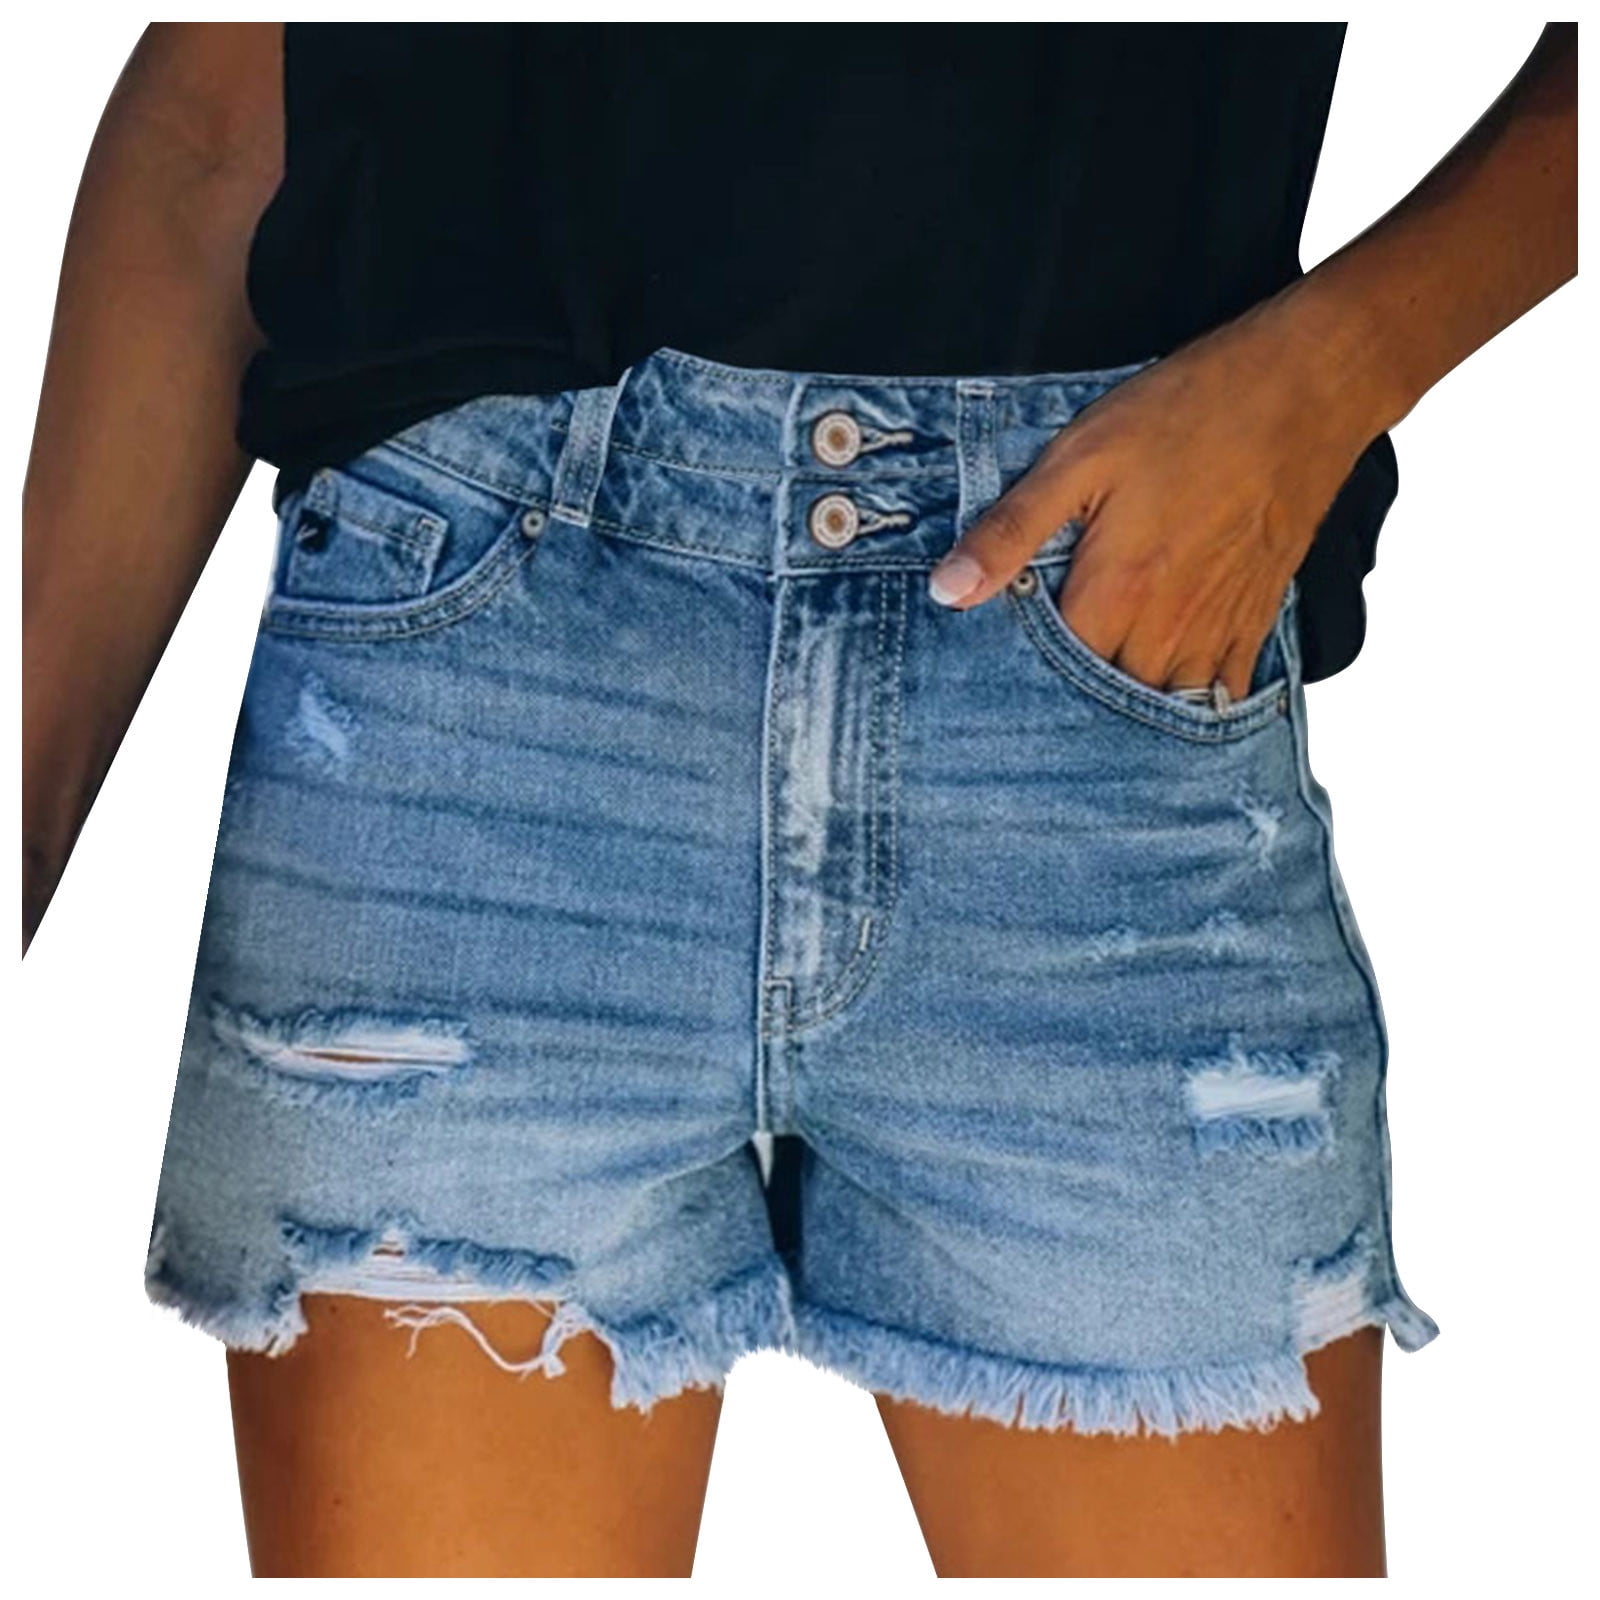 YYDGH Jean Shorts Womens High Waisted Stretchy Two Buttons Frayed Raw Hem  Ripped Denim Shorts Distressed Light Blue S